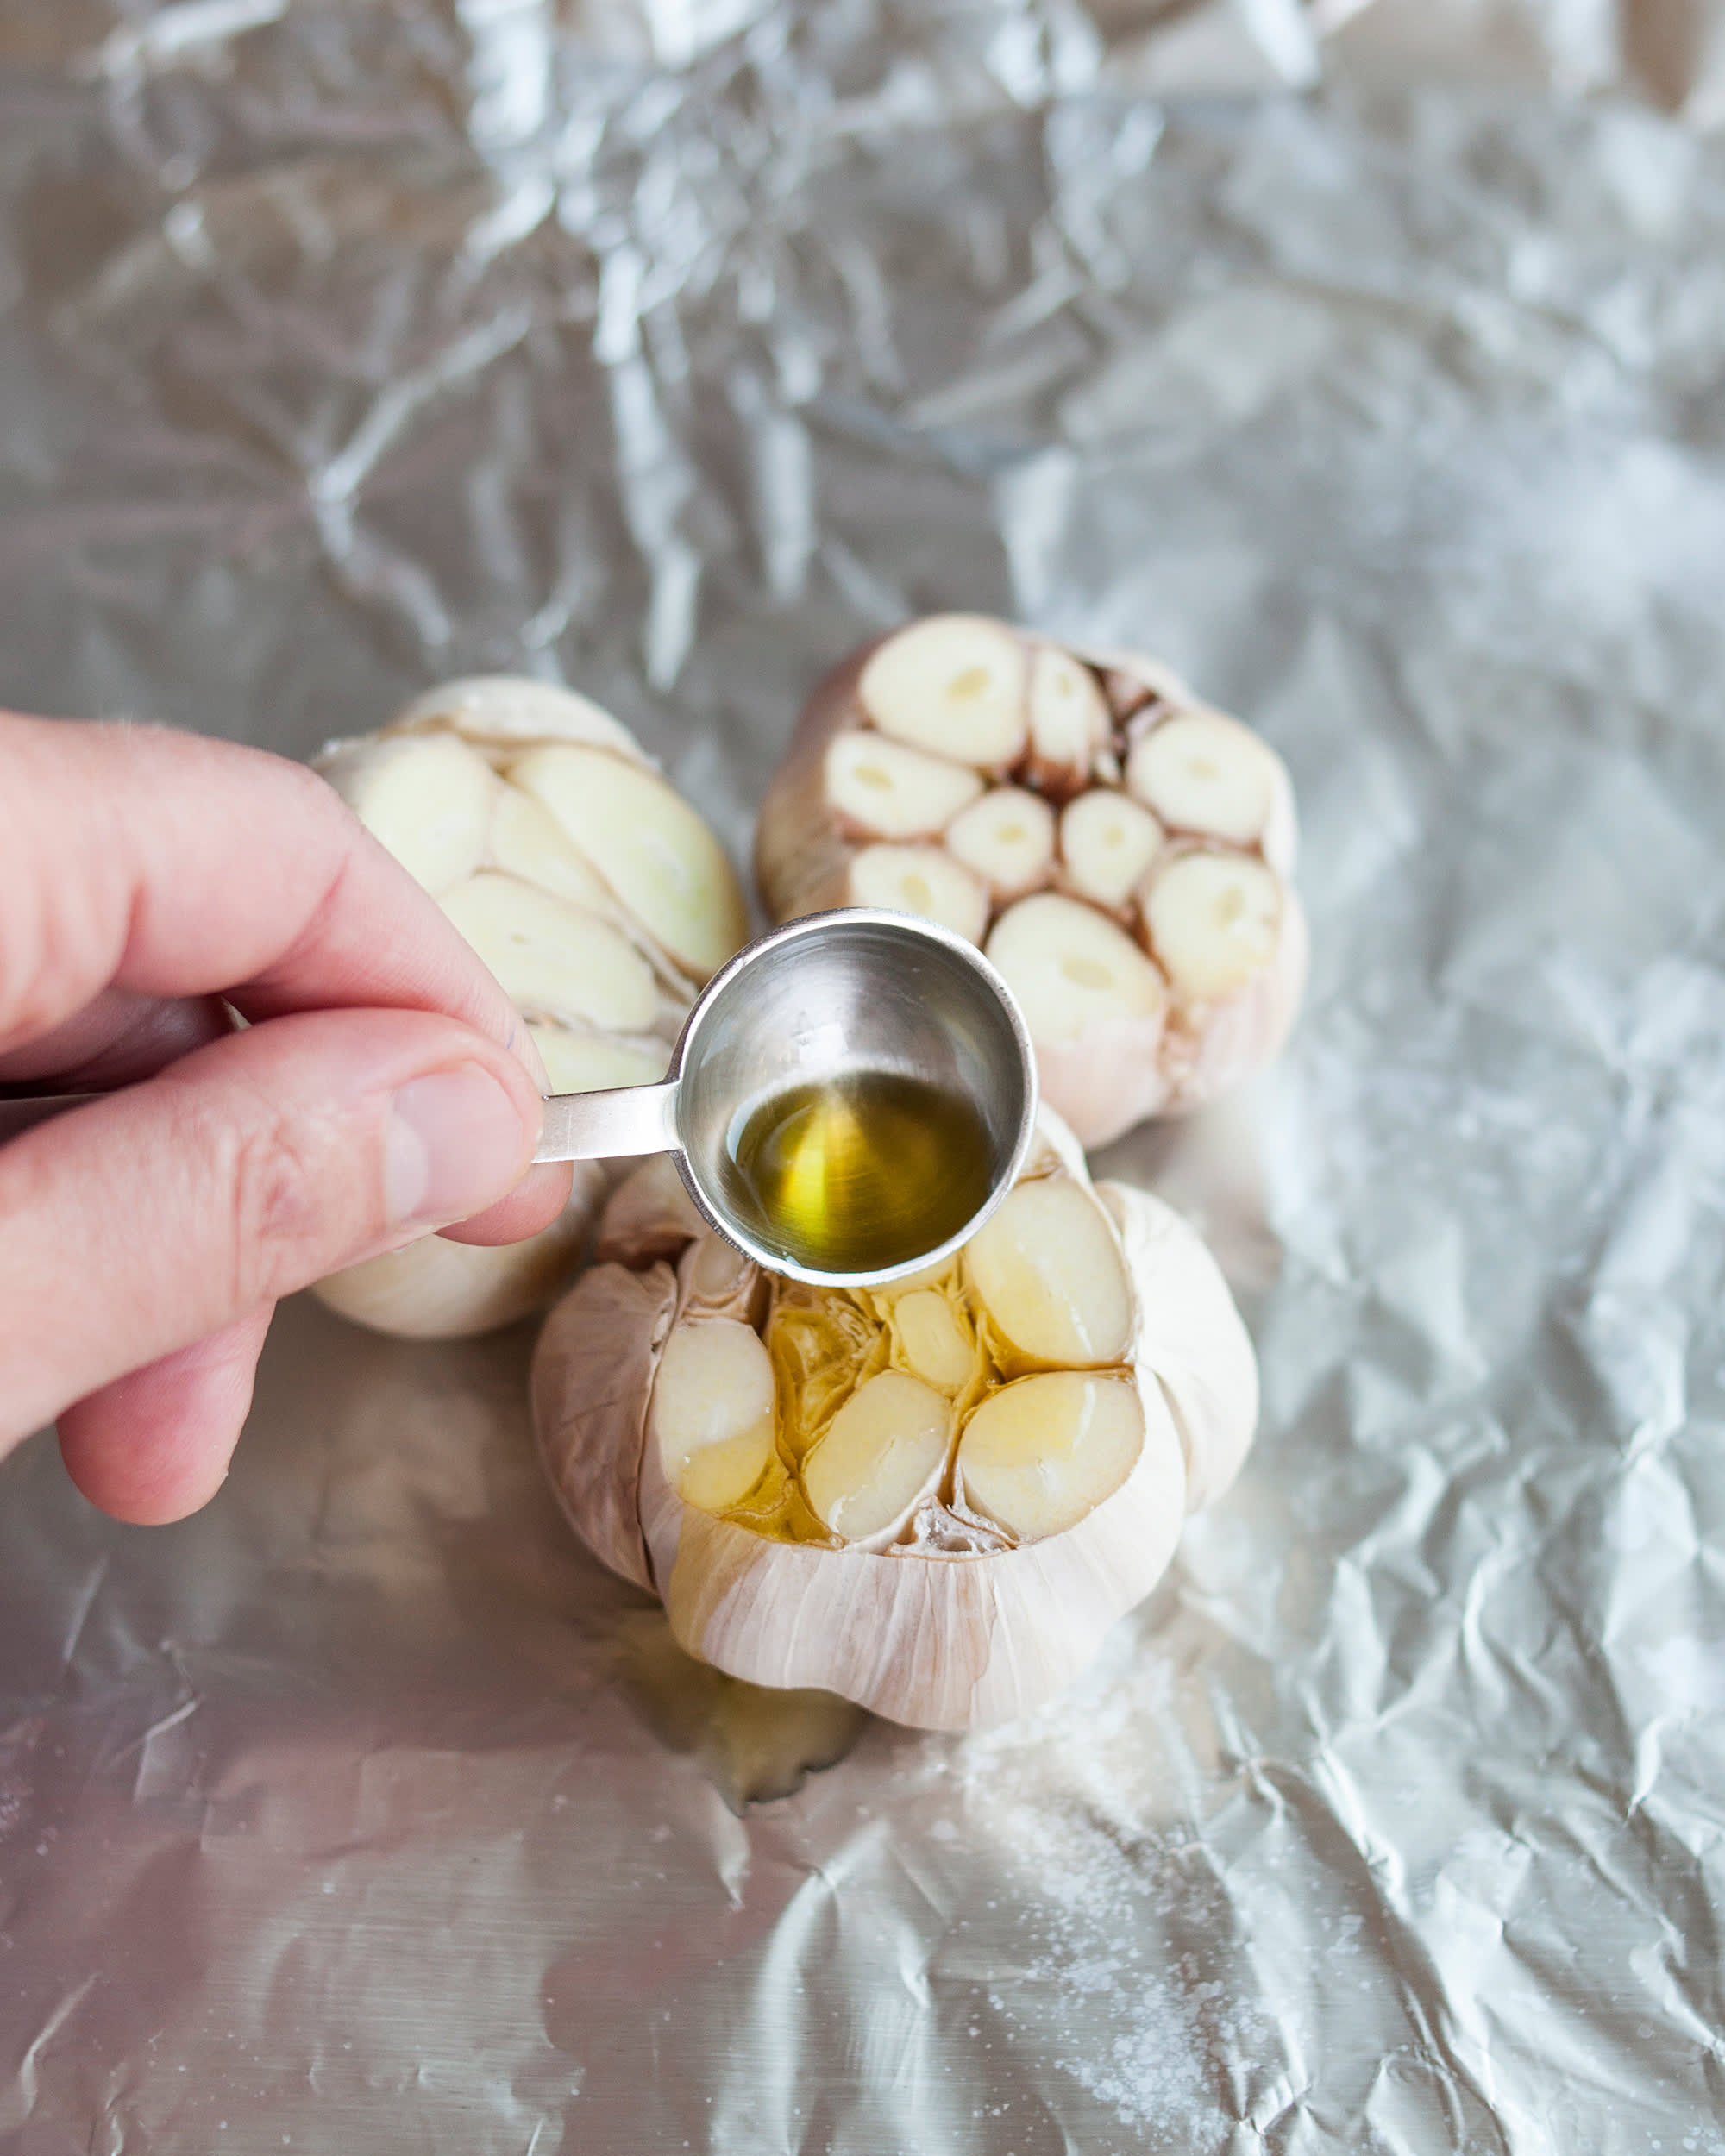 How To Roast Garlic in the Oven | Kitchn